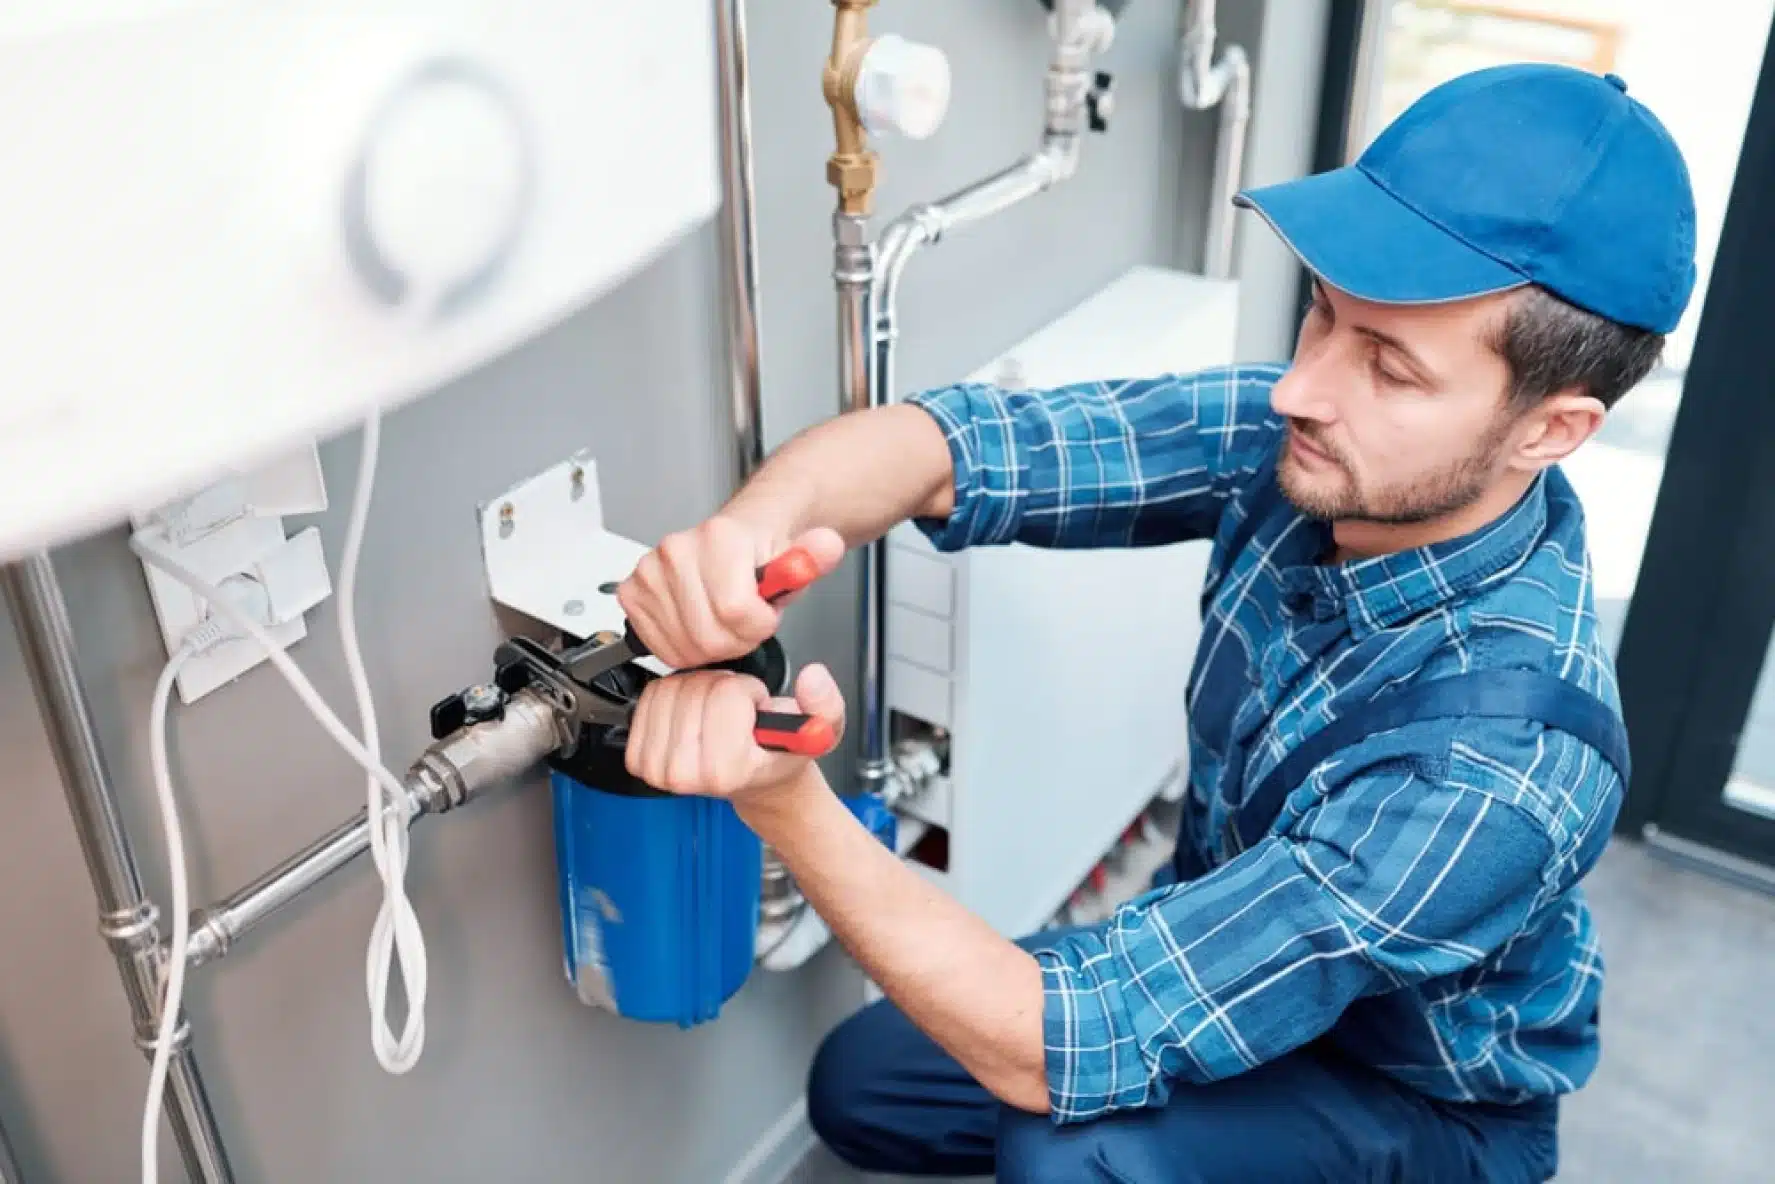 An experienced plumber installs a water filtration system, focusing intently on connecting pipes and fixtures to ensure clean and safe drinking water for the household.